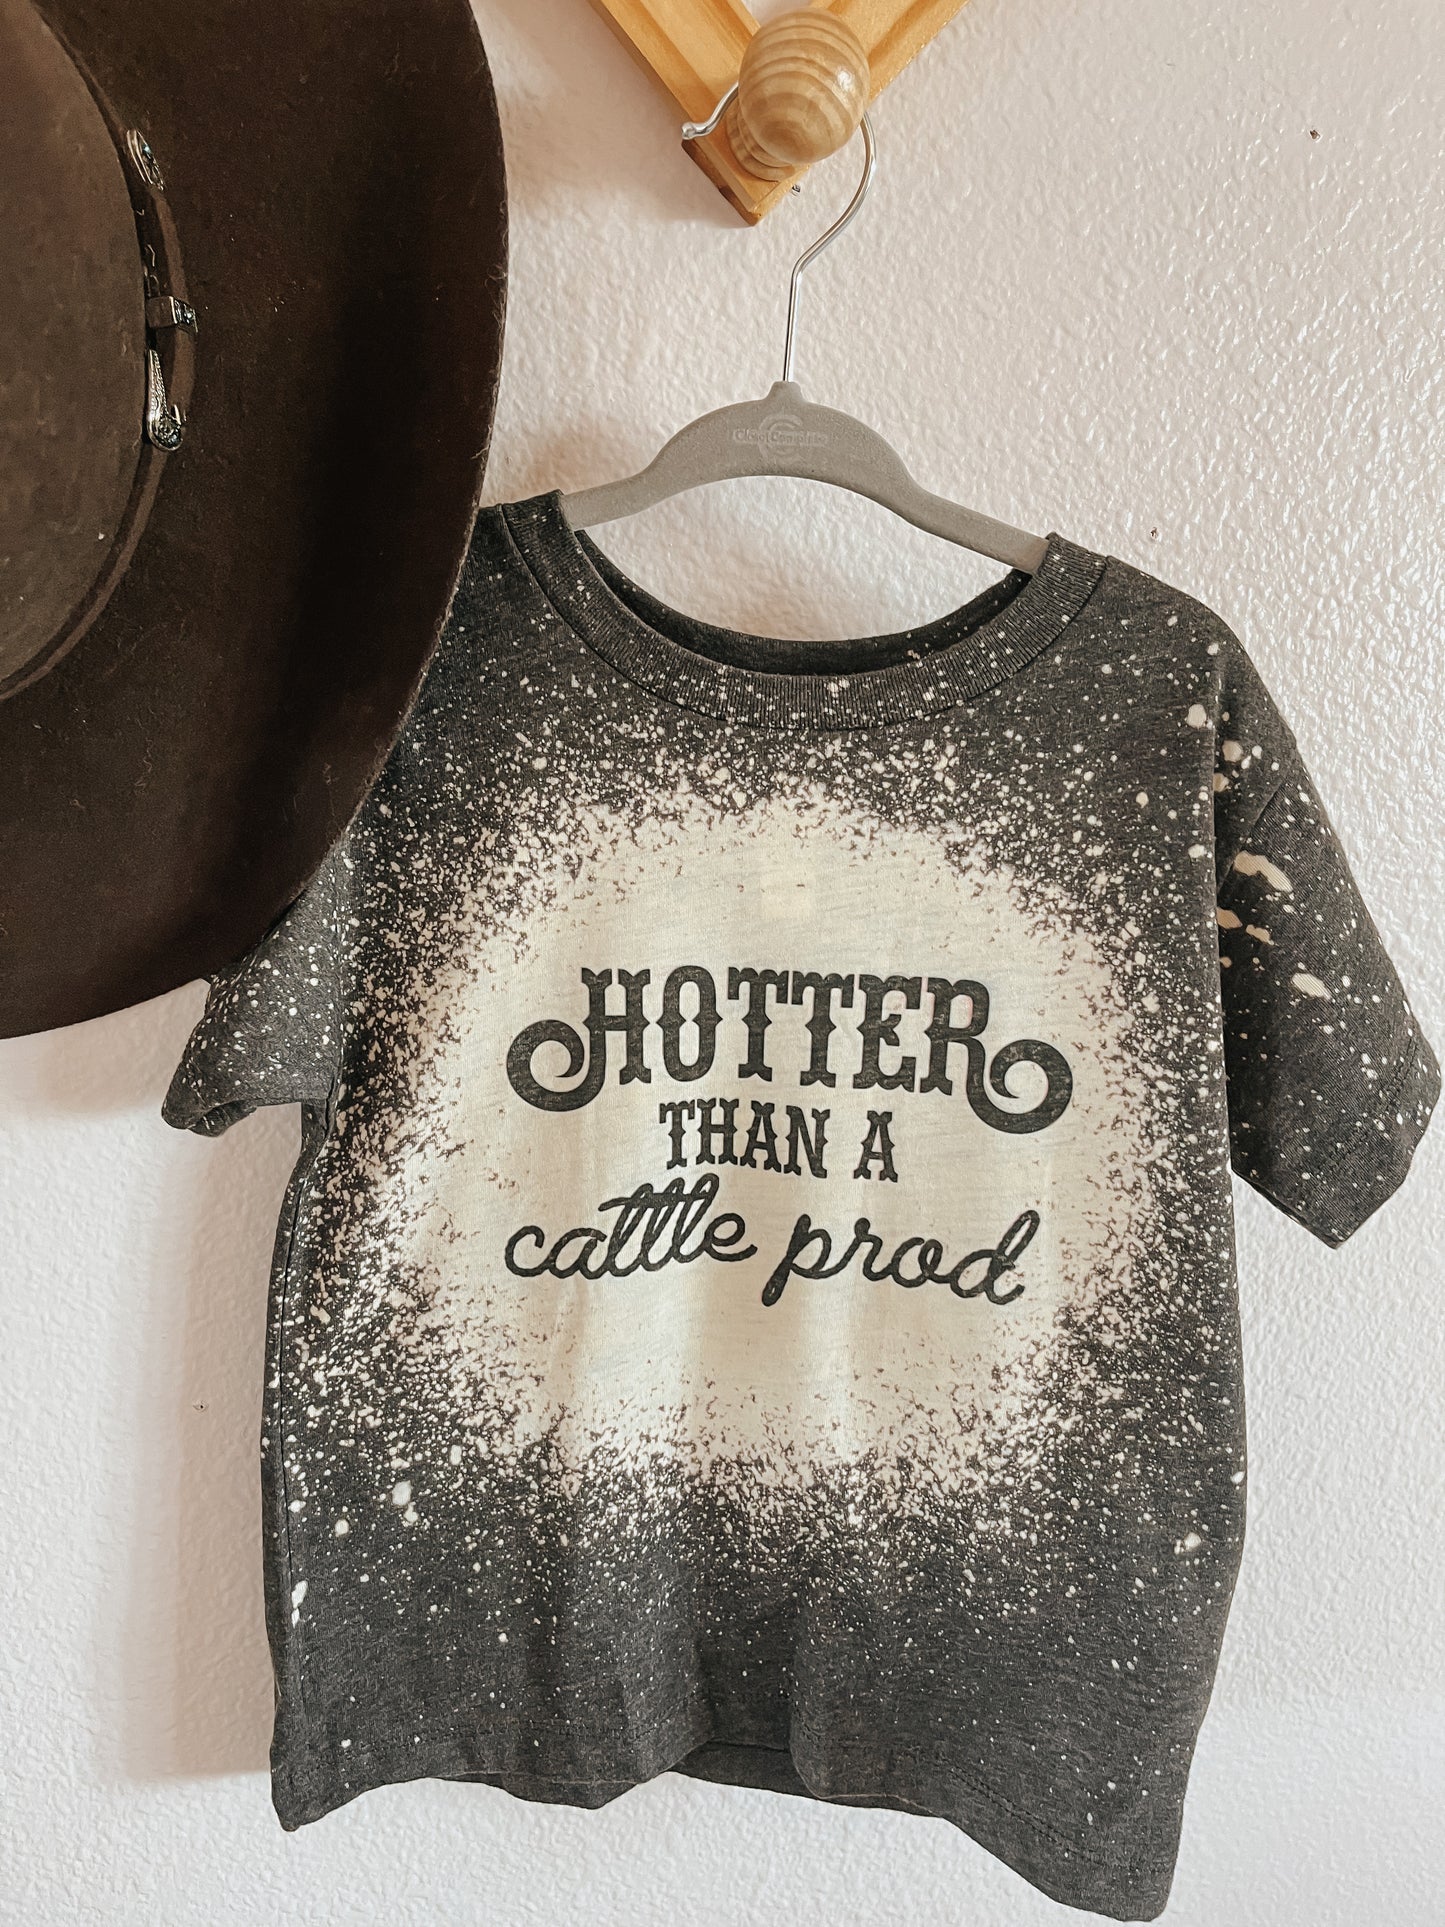 the Hotter than a |Cattle| Prod bleached tee